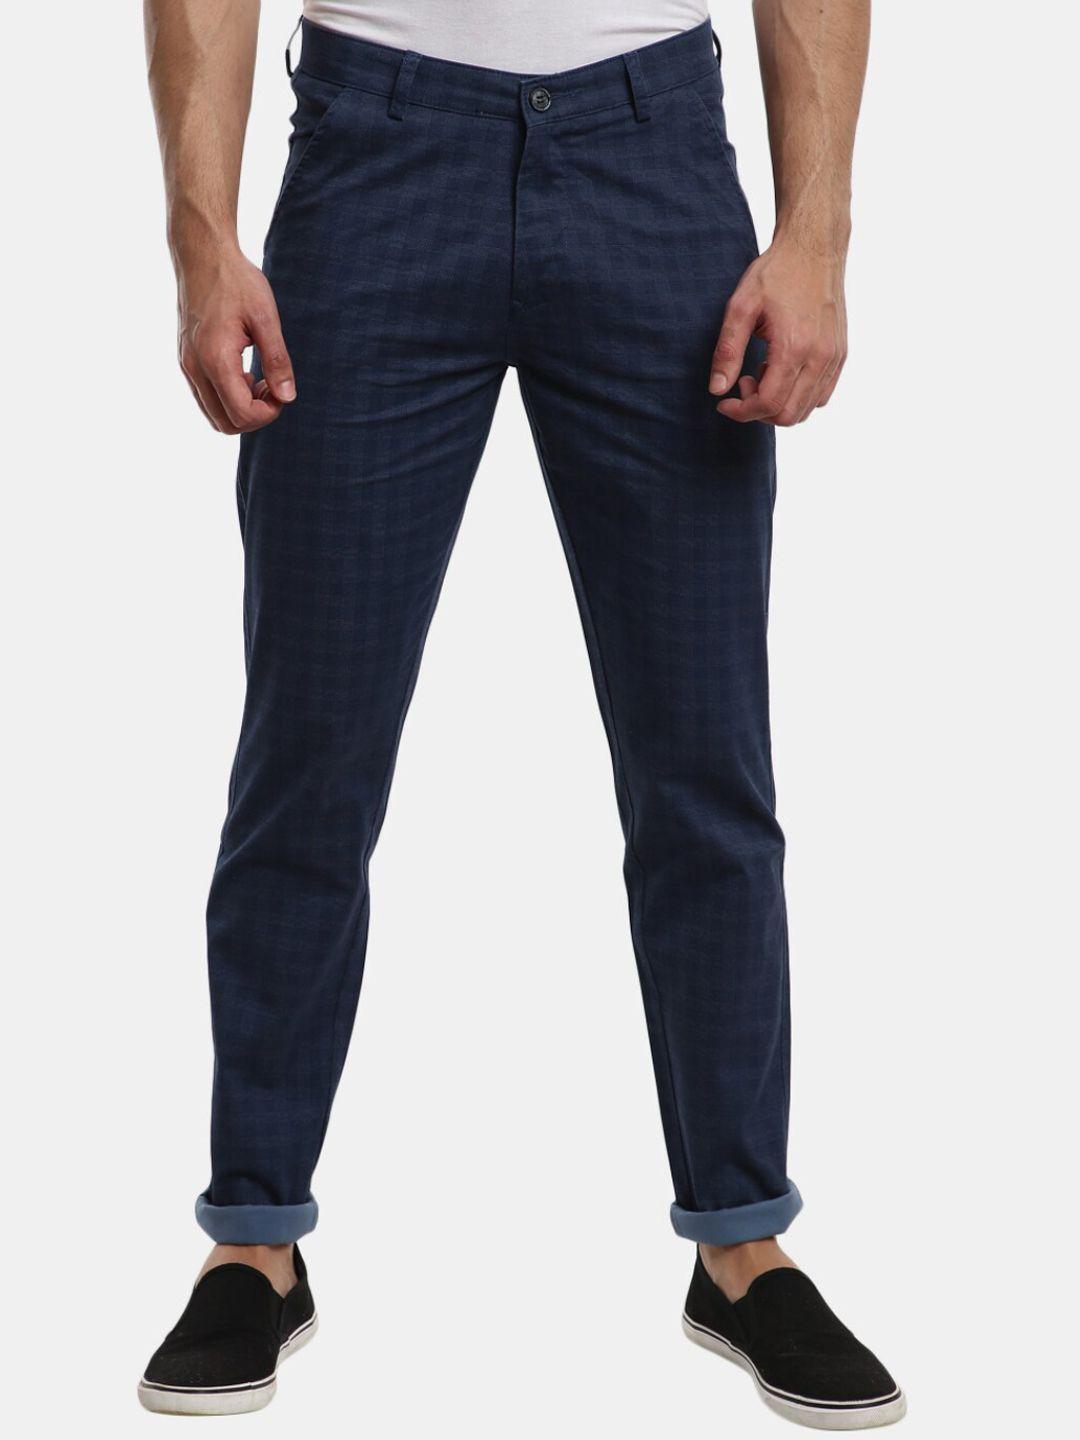 v-mart-men-blue-checked-classic-slim-fit-trousers